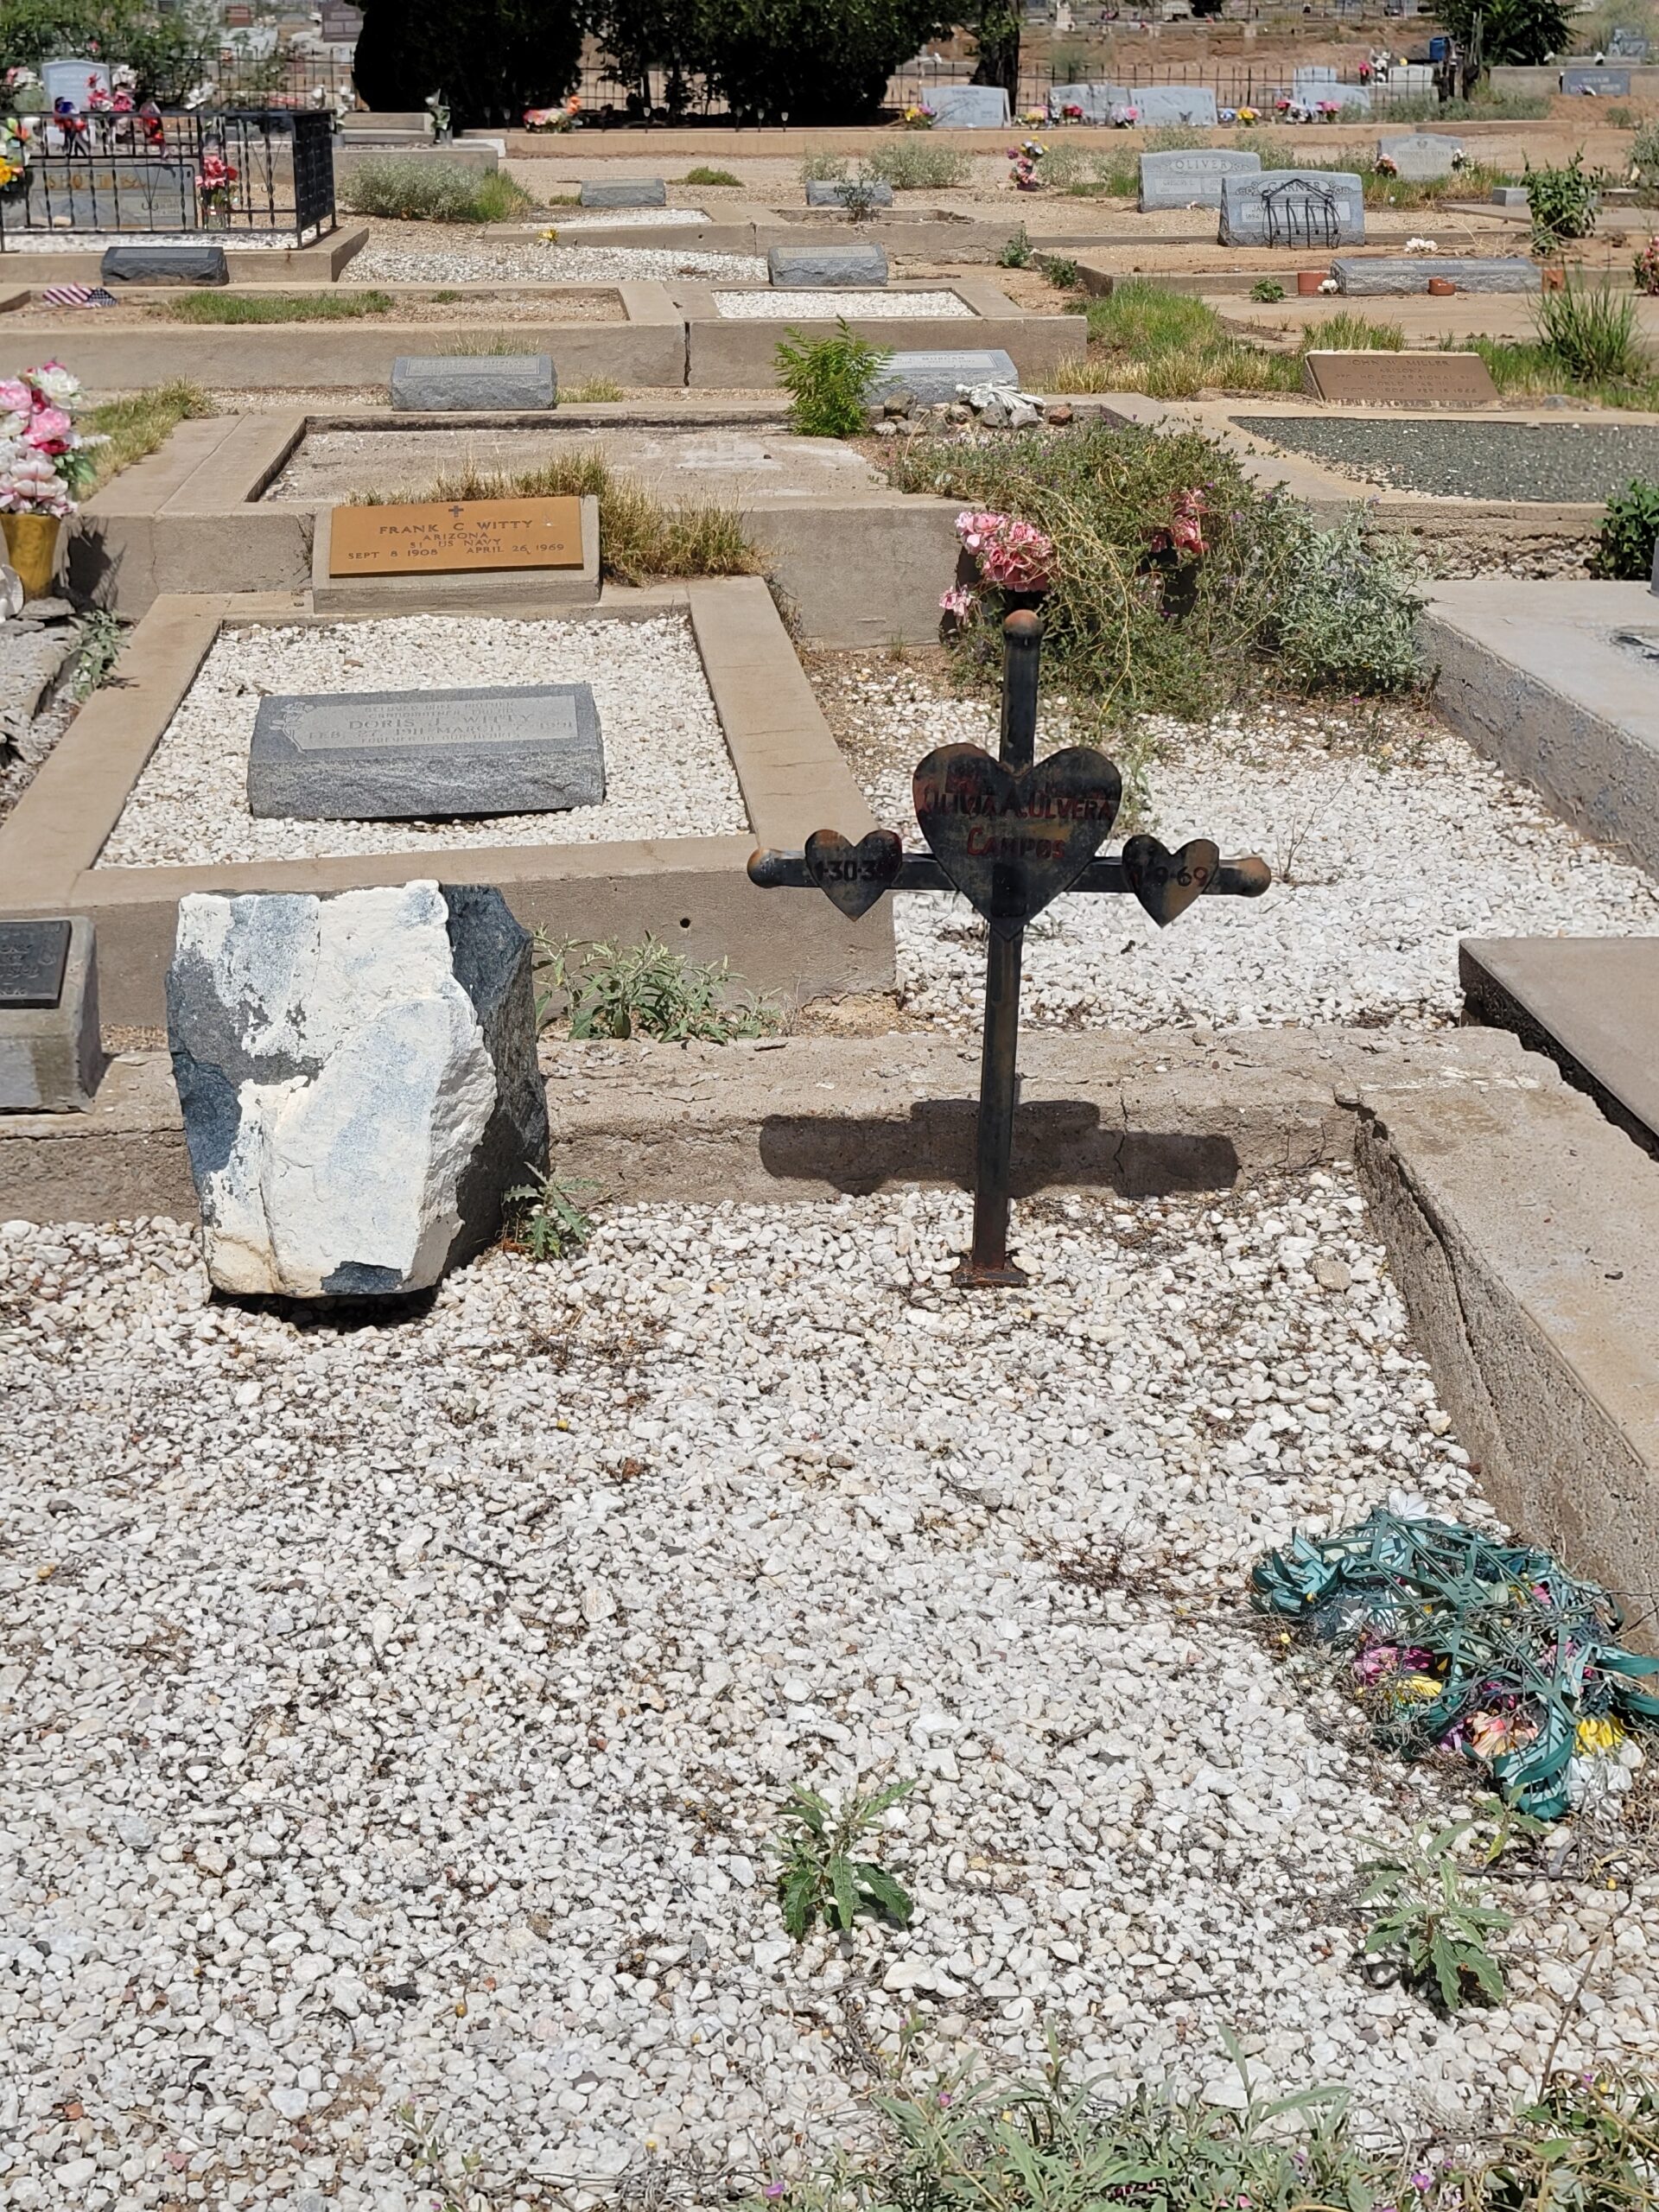 Grave with metal cross marker